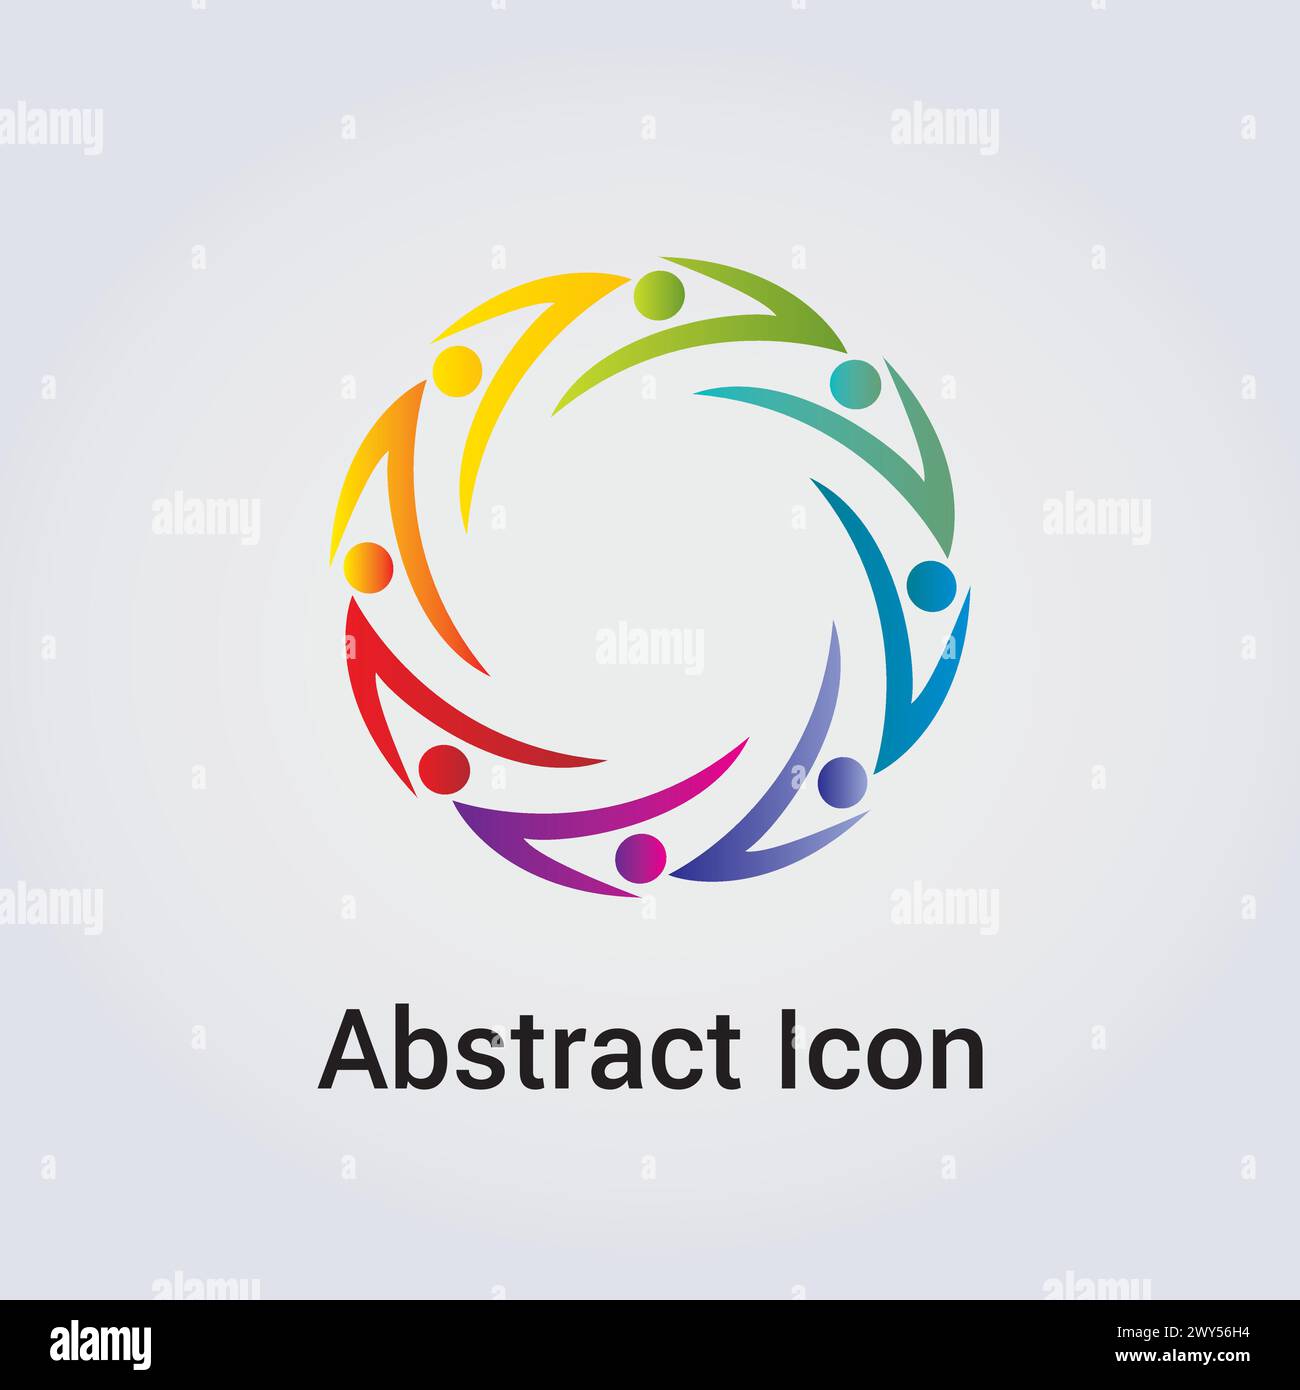 Abstract Icon Logo Design Primary Shapes Silhouettes People Dance Star Circle Clover Miscellaneous Communications Network Rainbow Colors Vector Stock Vector